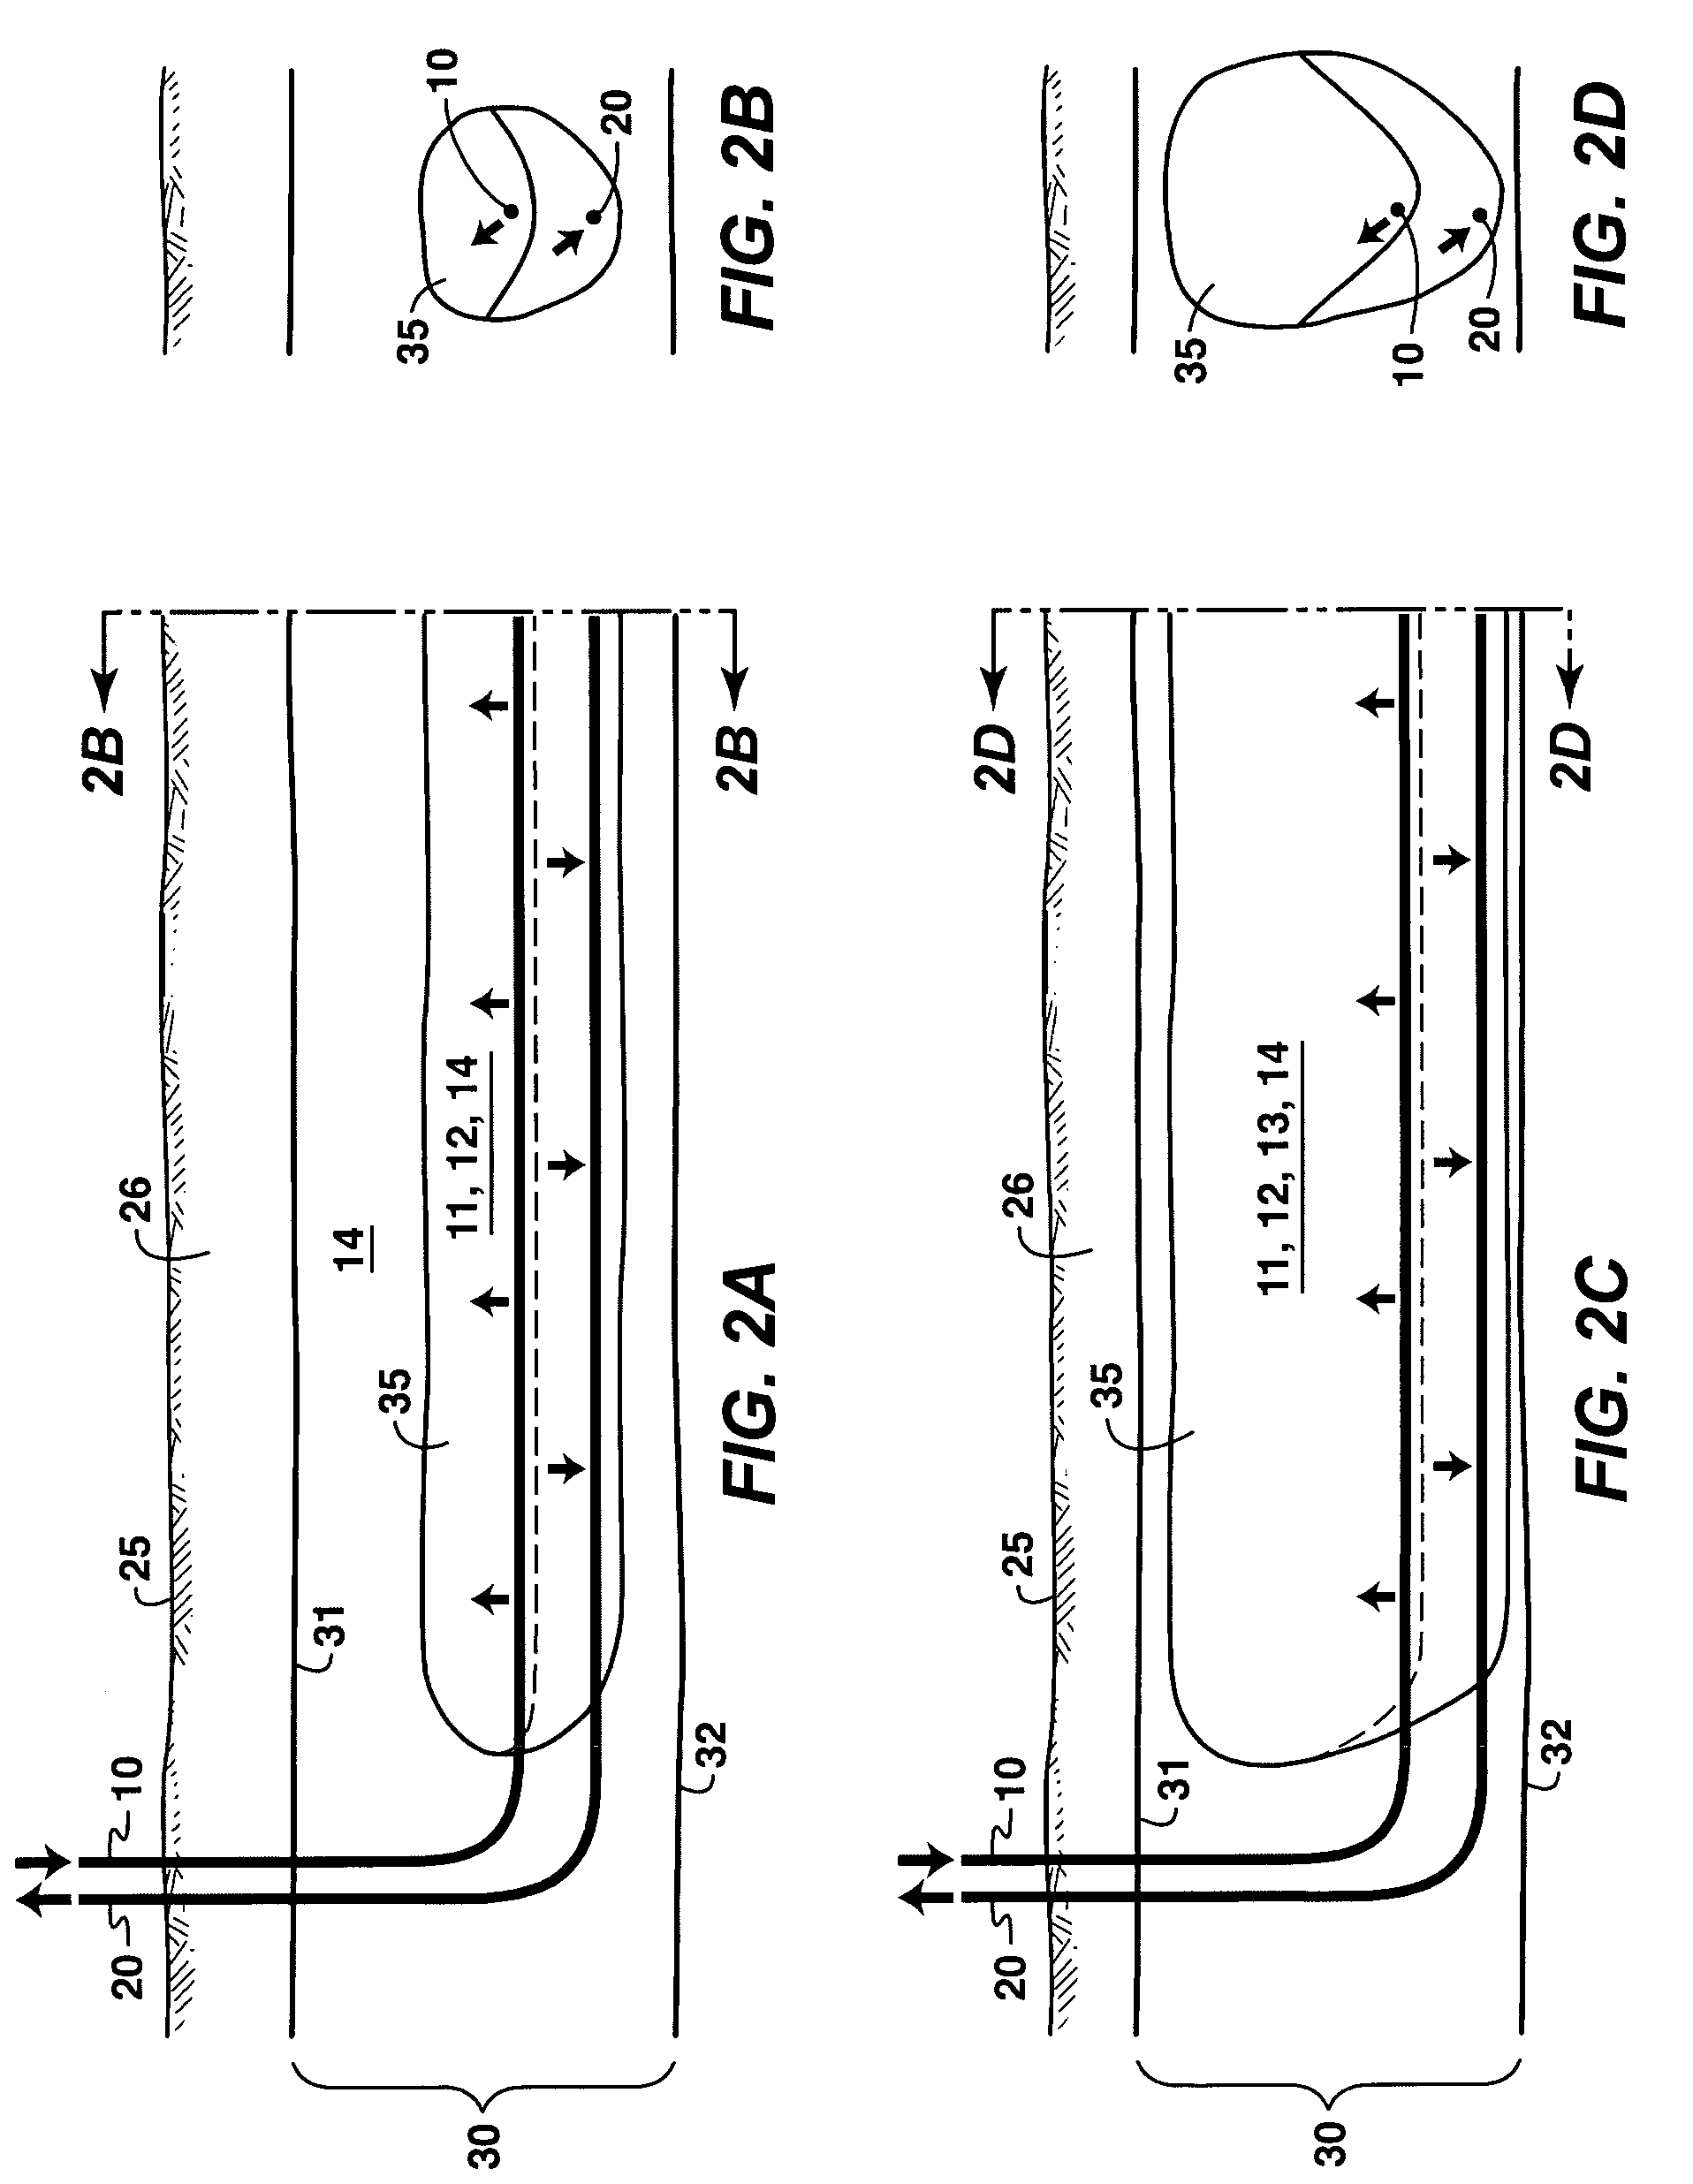 Process for in situ recovery of bitumen and heavy oil